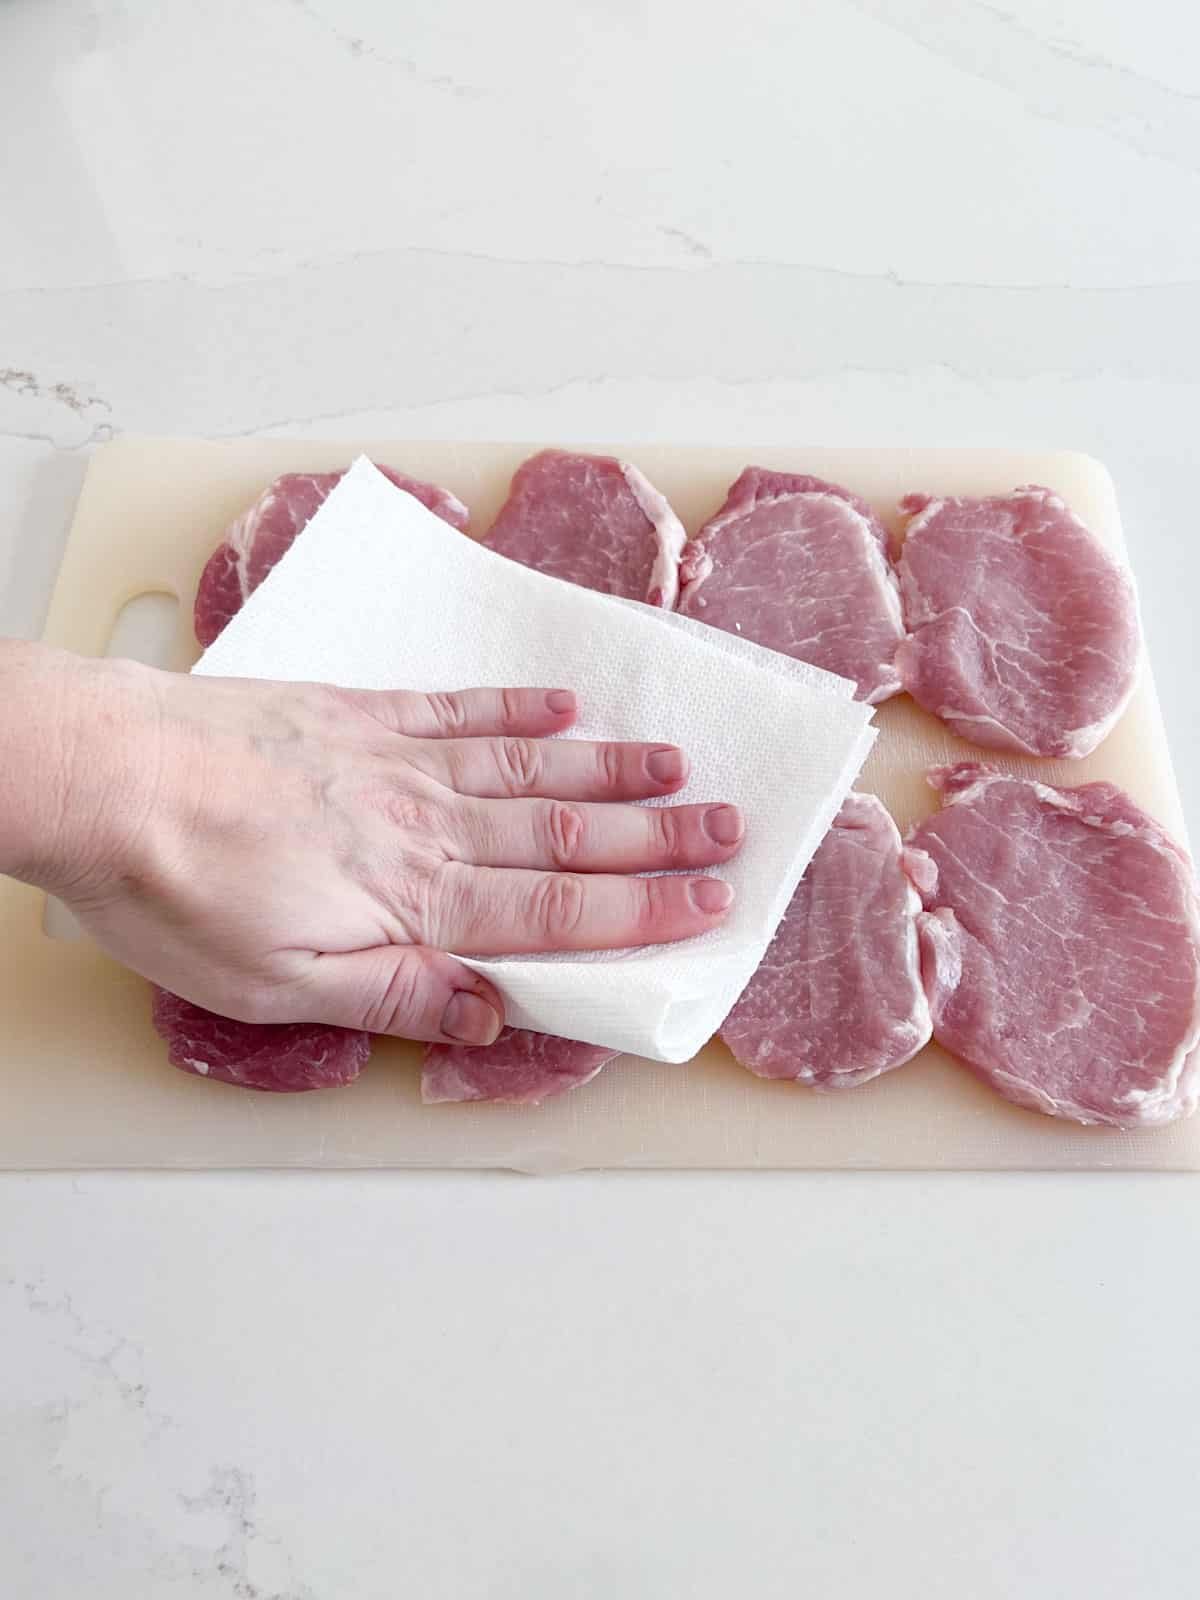 A hand patting dry thin pork chops with a paper towel on a white cutting board.